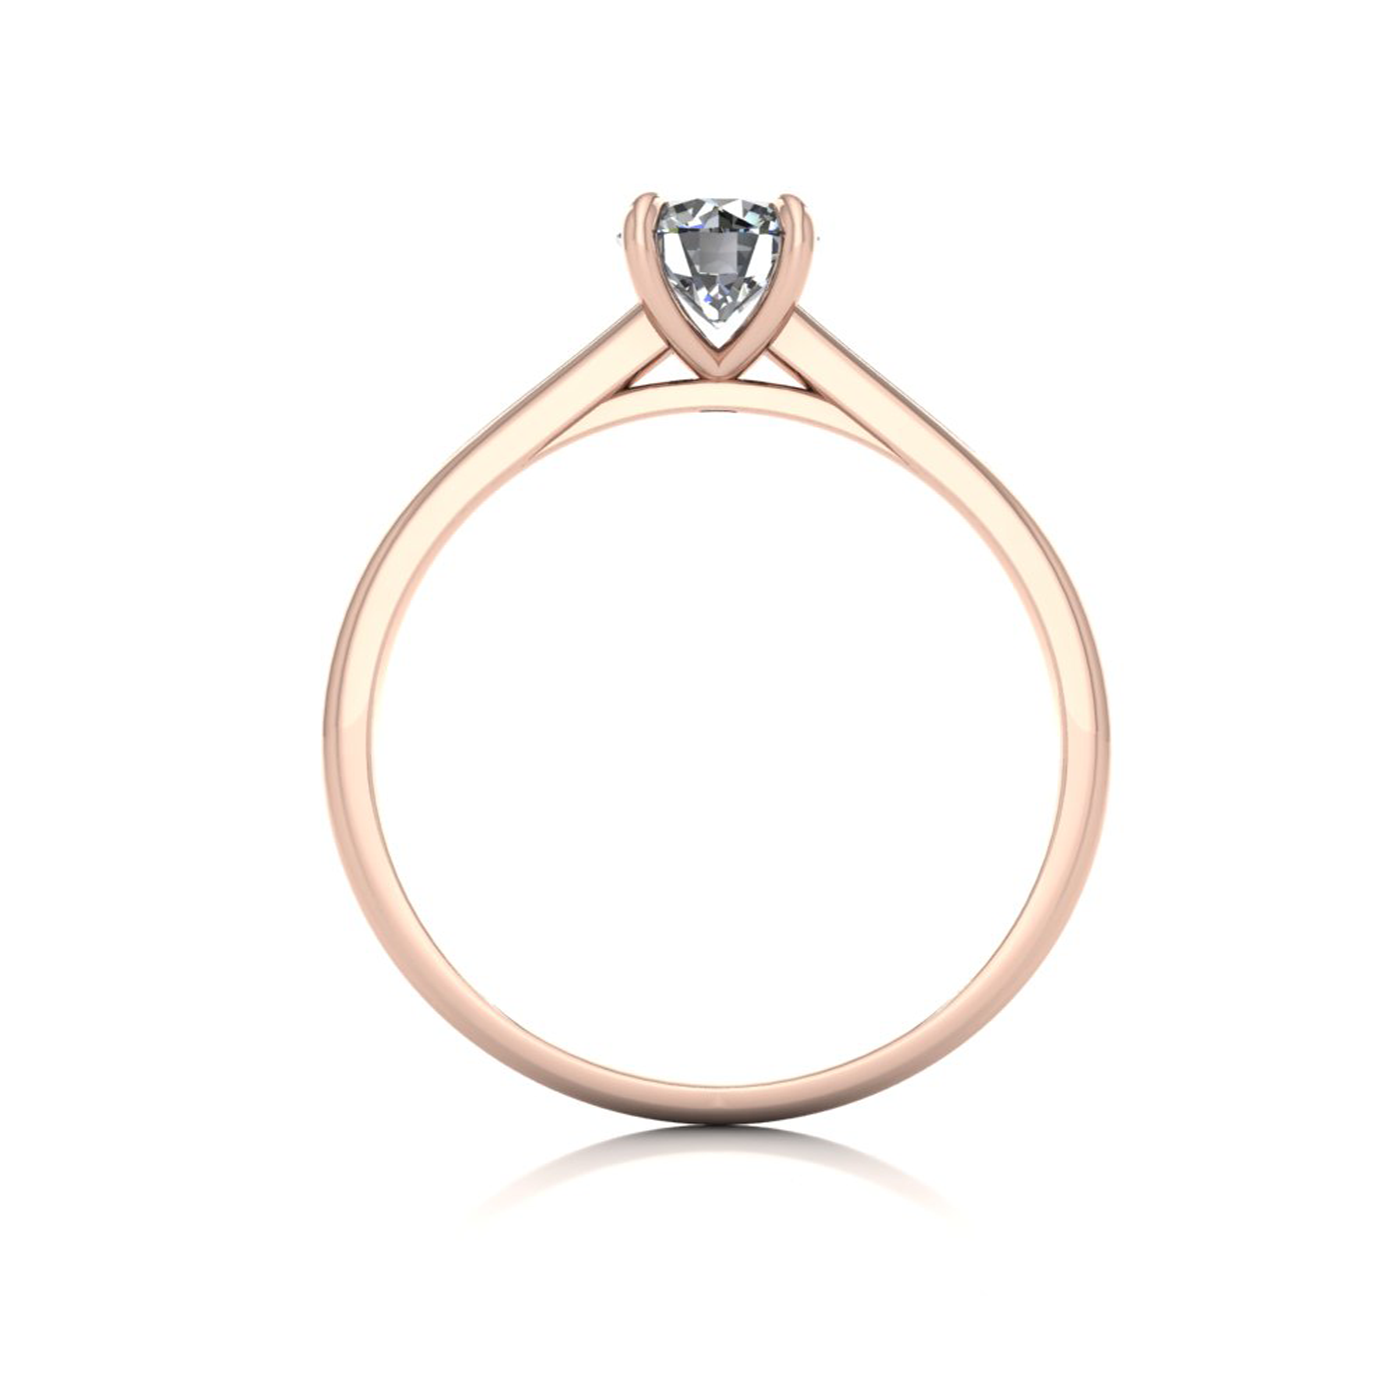 18k rose gold 0.50ct 4 prongs solitaire round cut diamond engagement ring with whisper thin band